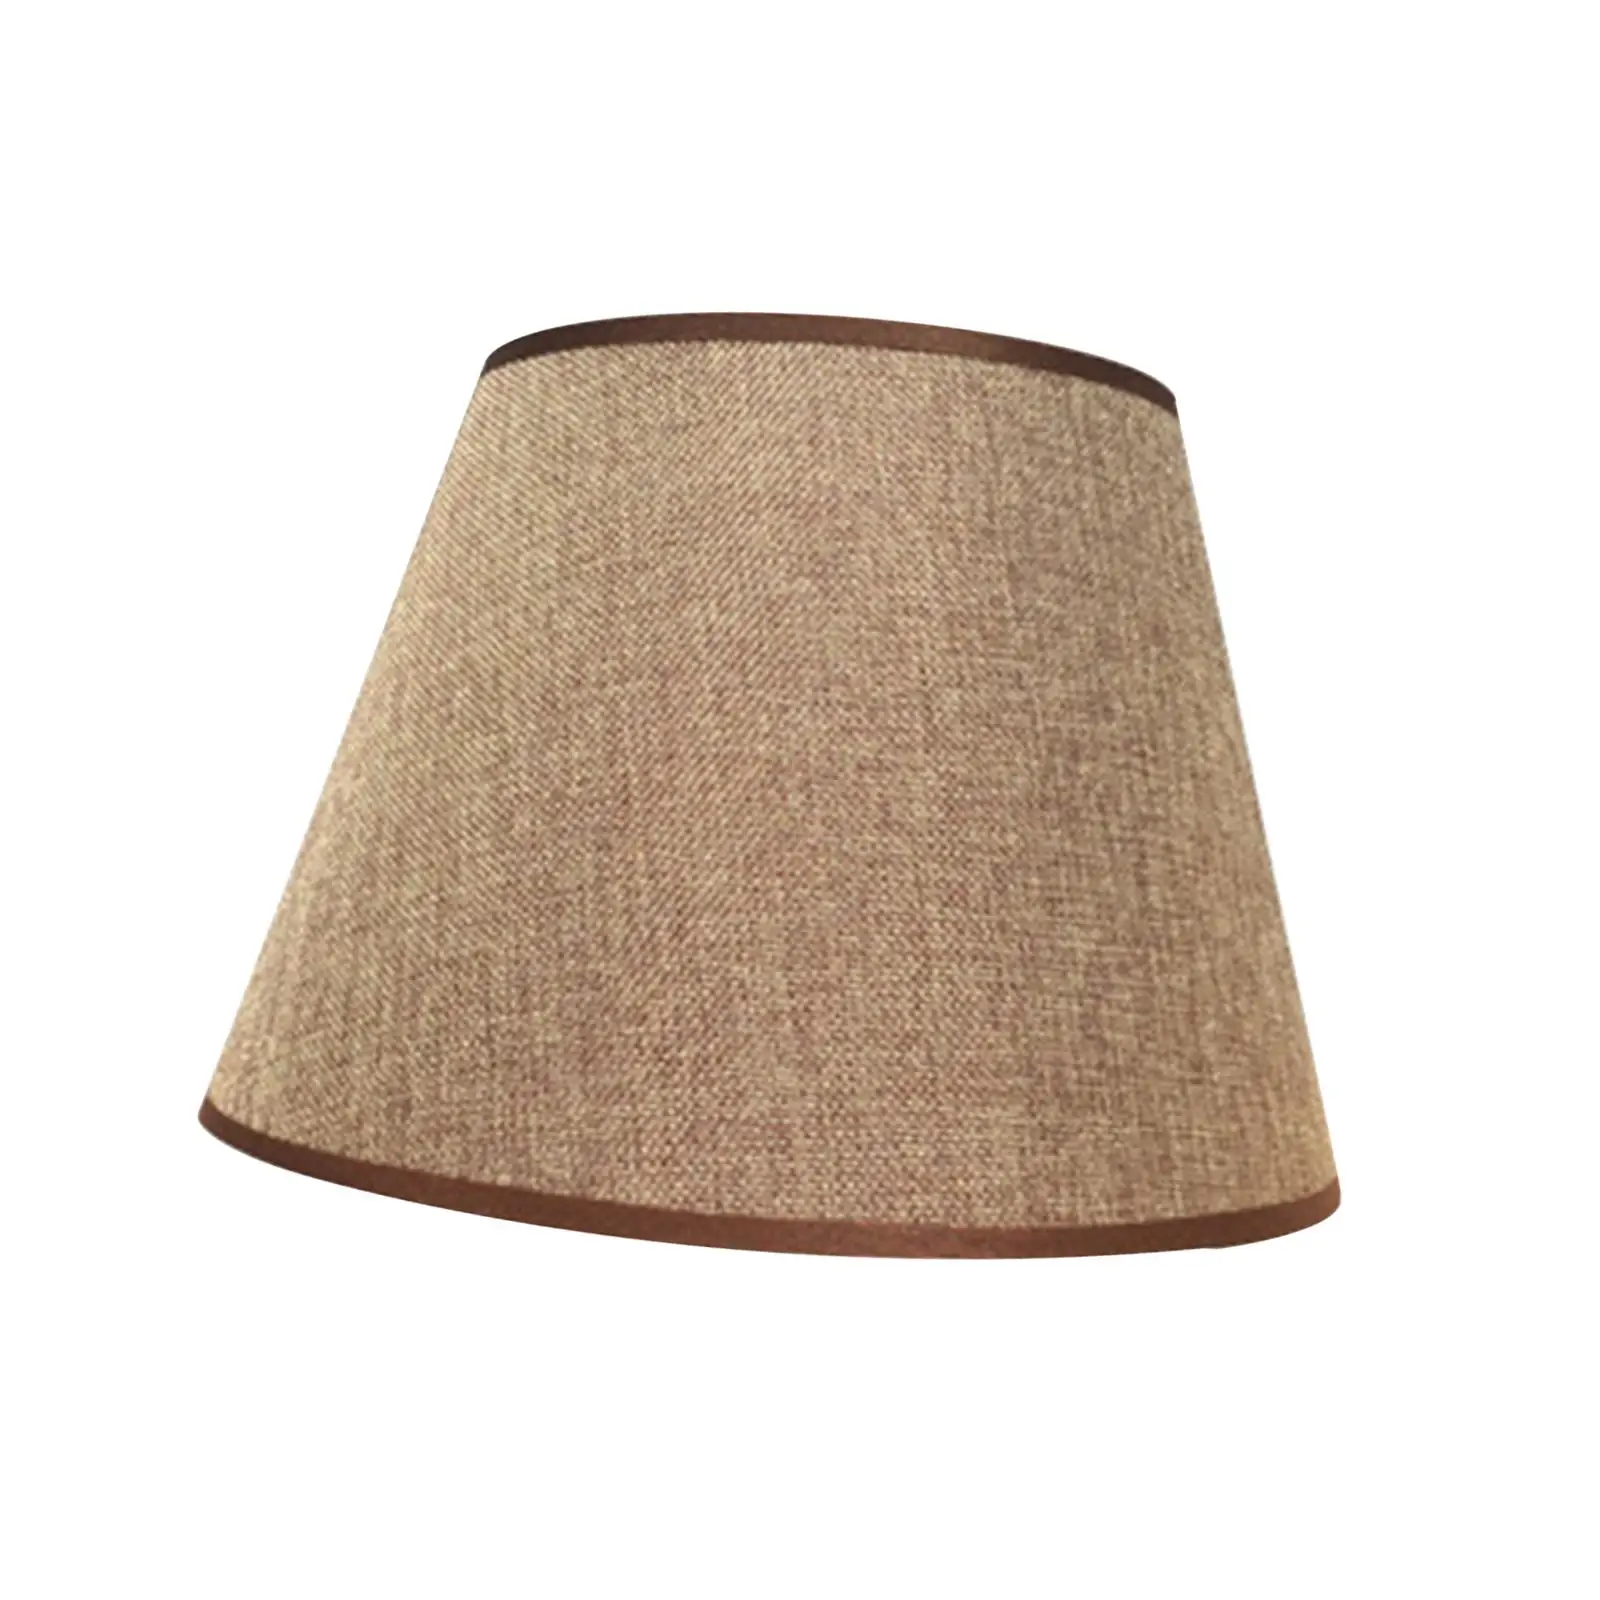 Table Lamp Shade Desk Light Lampshade Simple Wall Sconce Shade for Bedroom Home